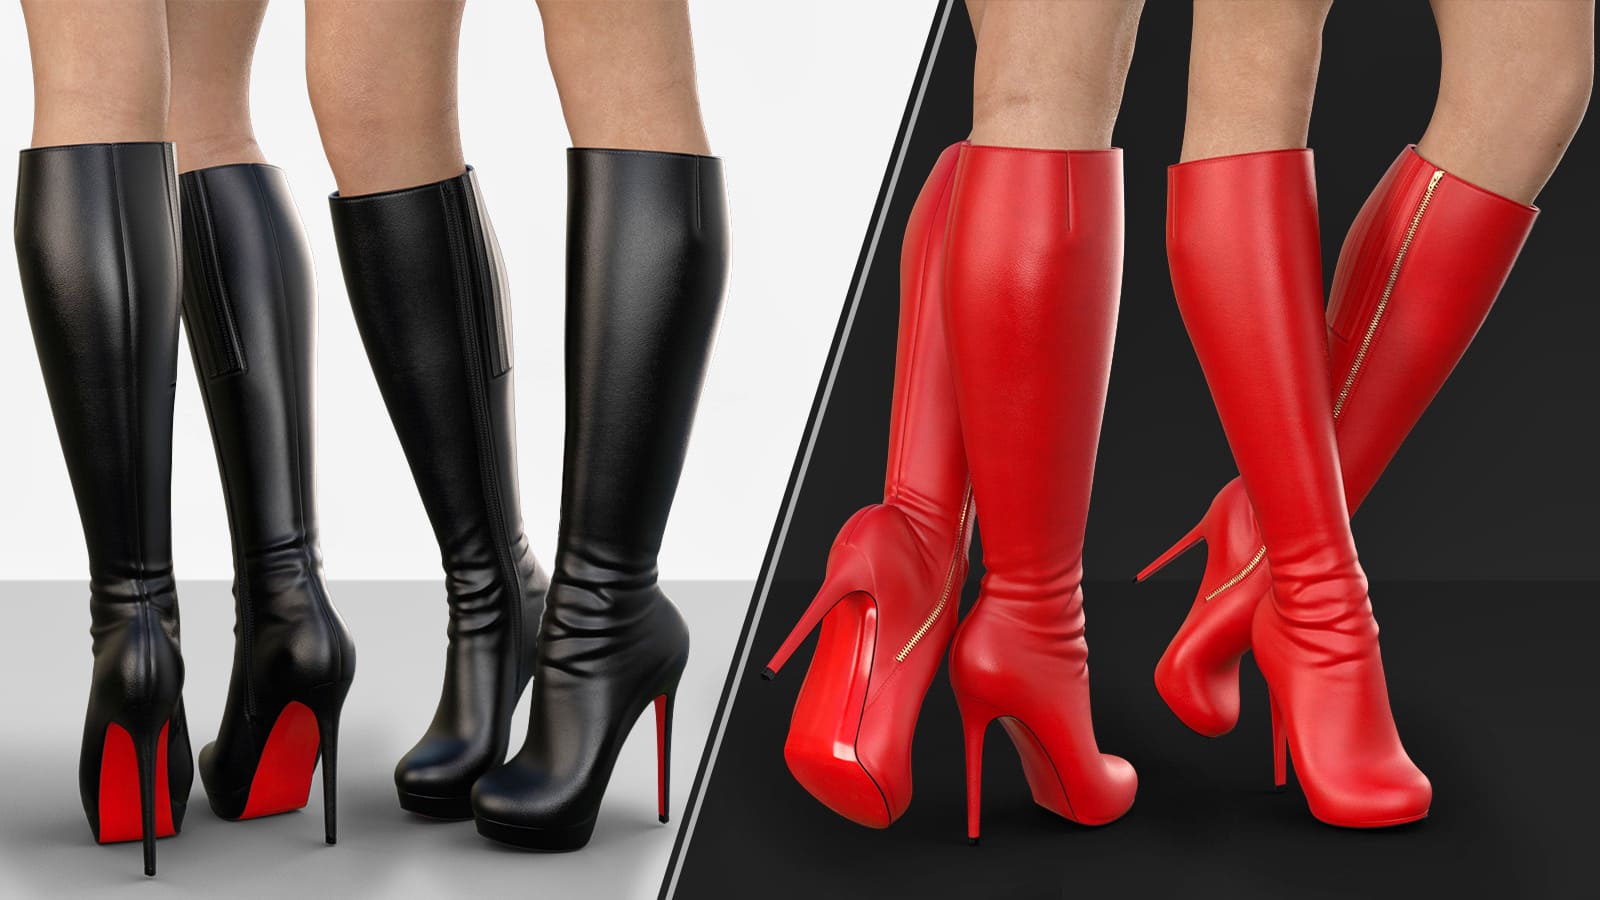 Knee High Stiletto Heel Boots for G8F and G8.1F_DAZ3D下载站